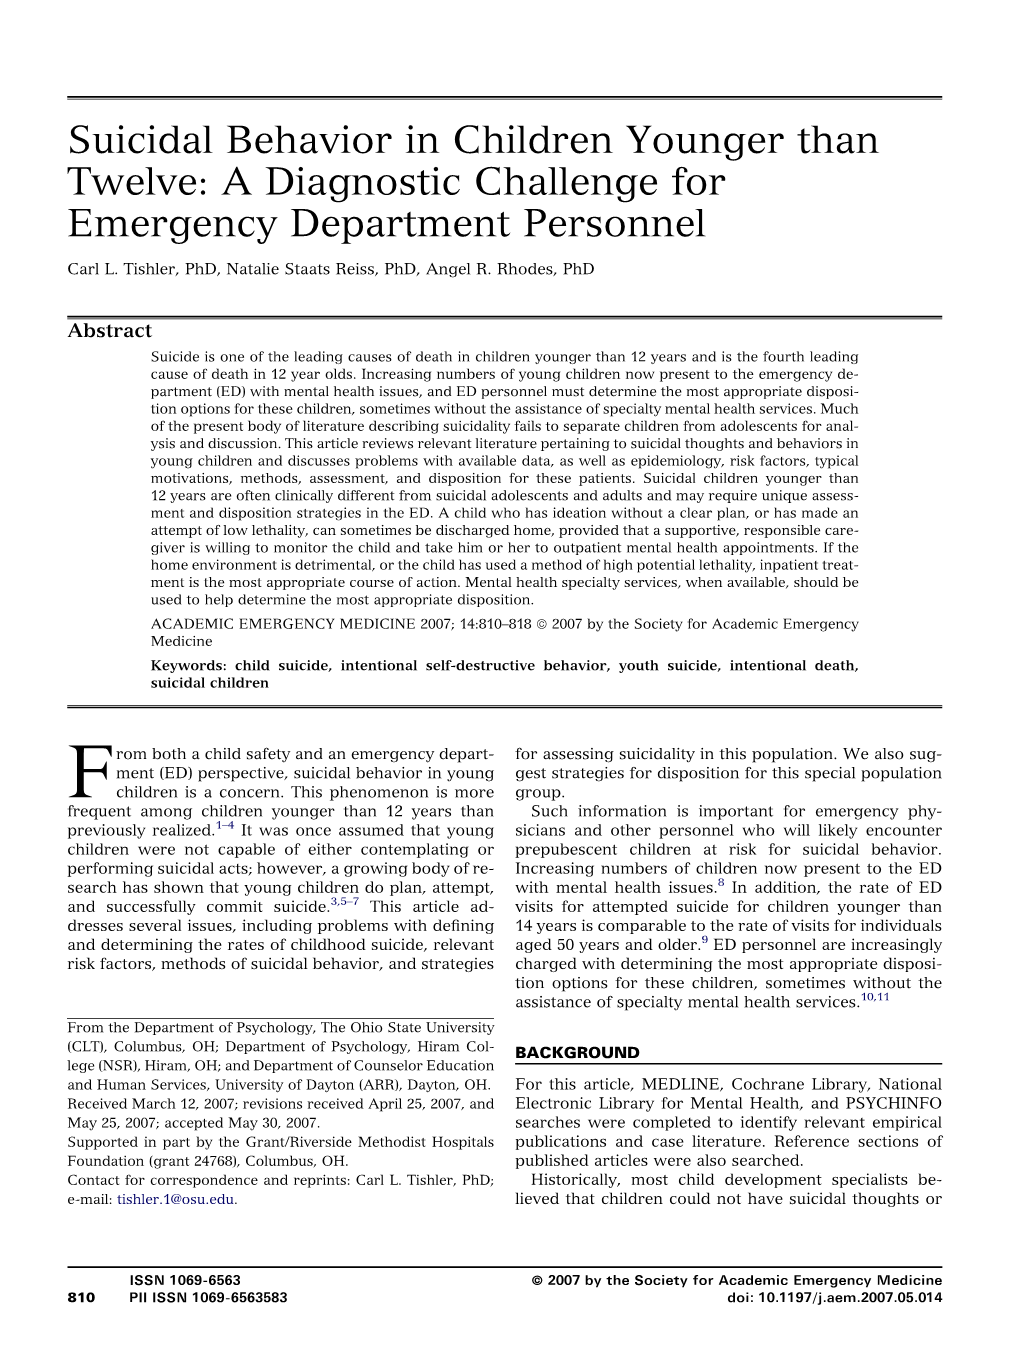 Suicidal Behavior in Children Younger Than Twelve: a Diagnostic Challenge for Emergency Department Personnel